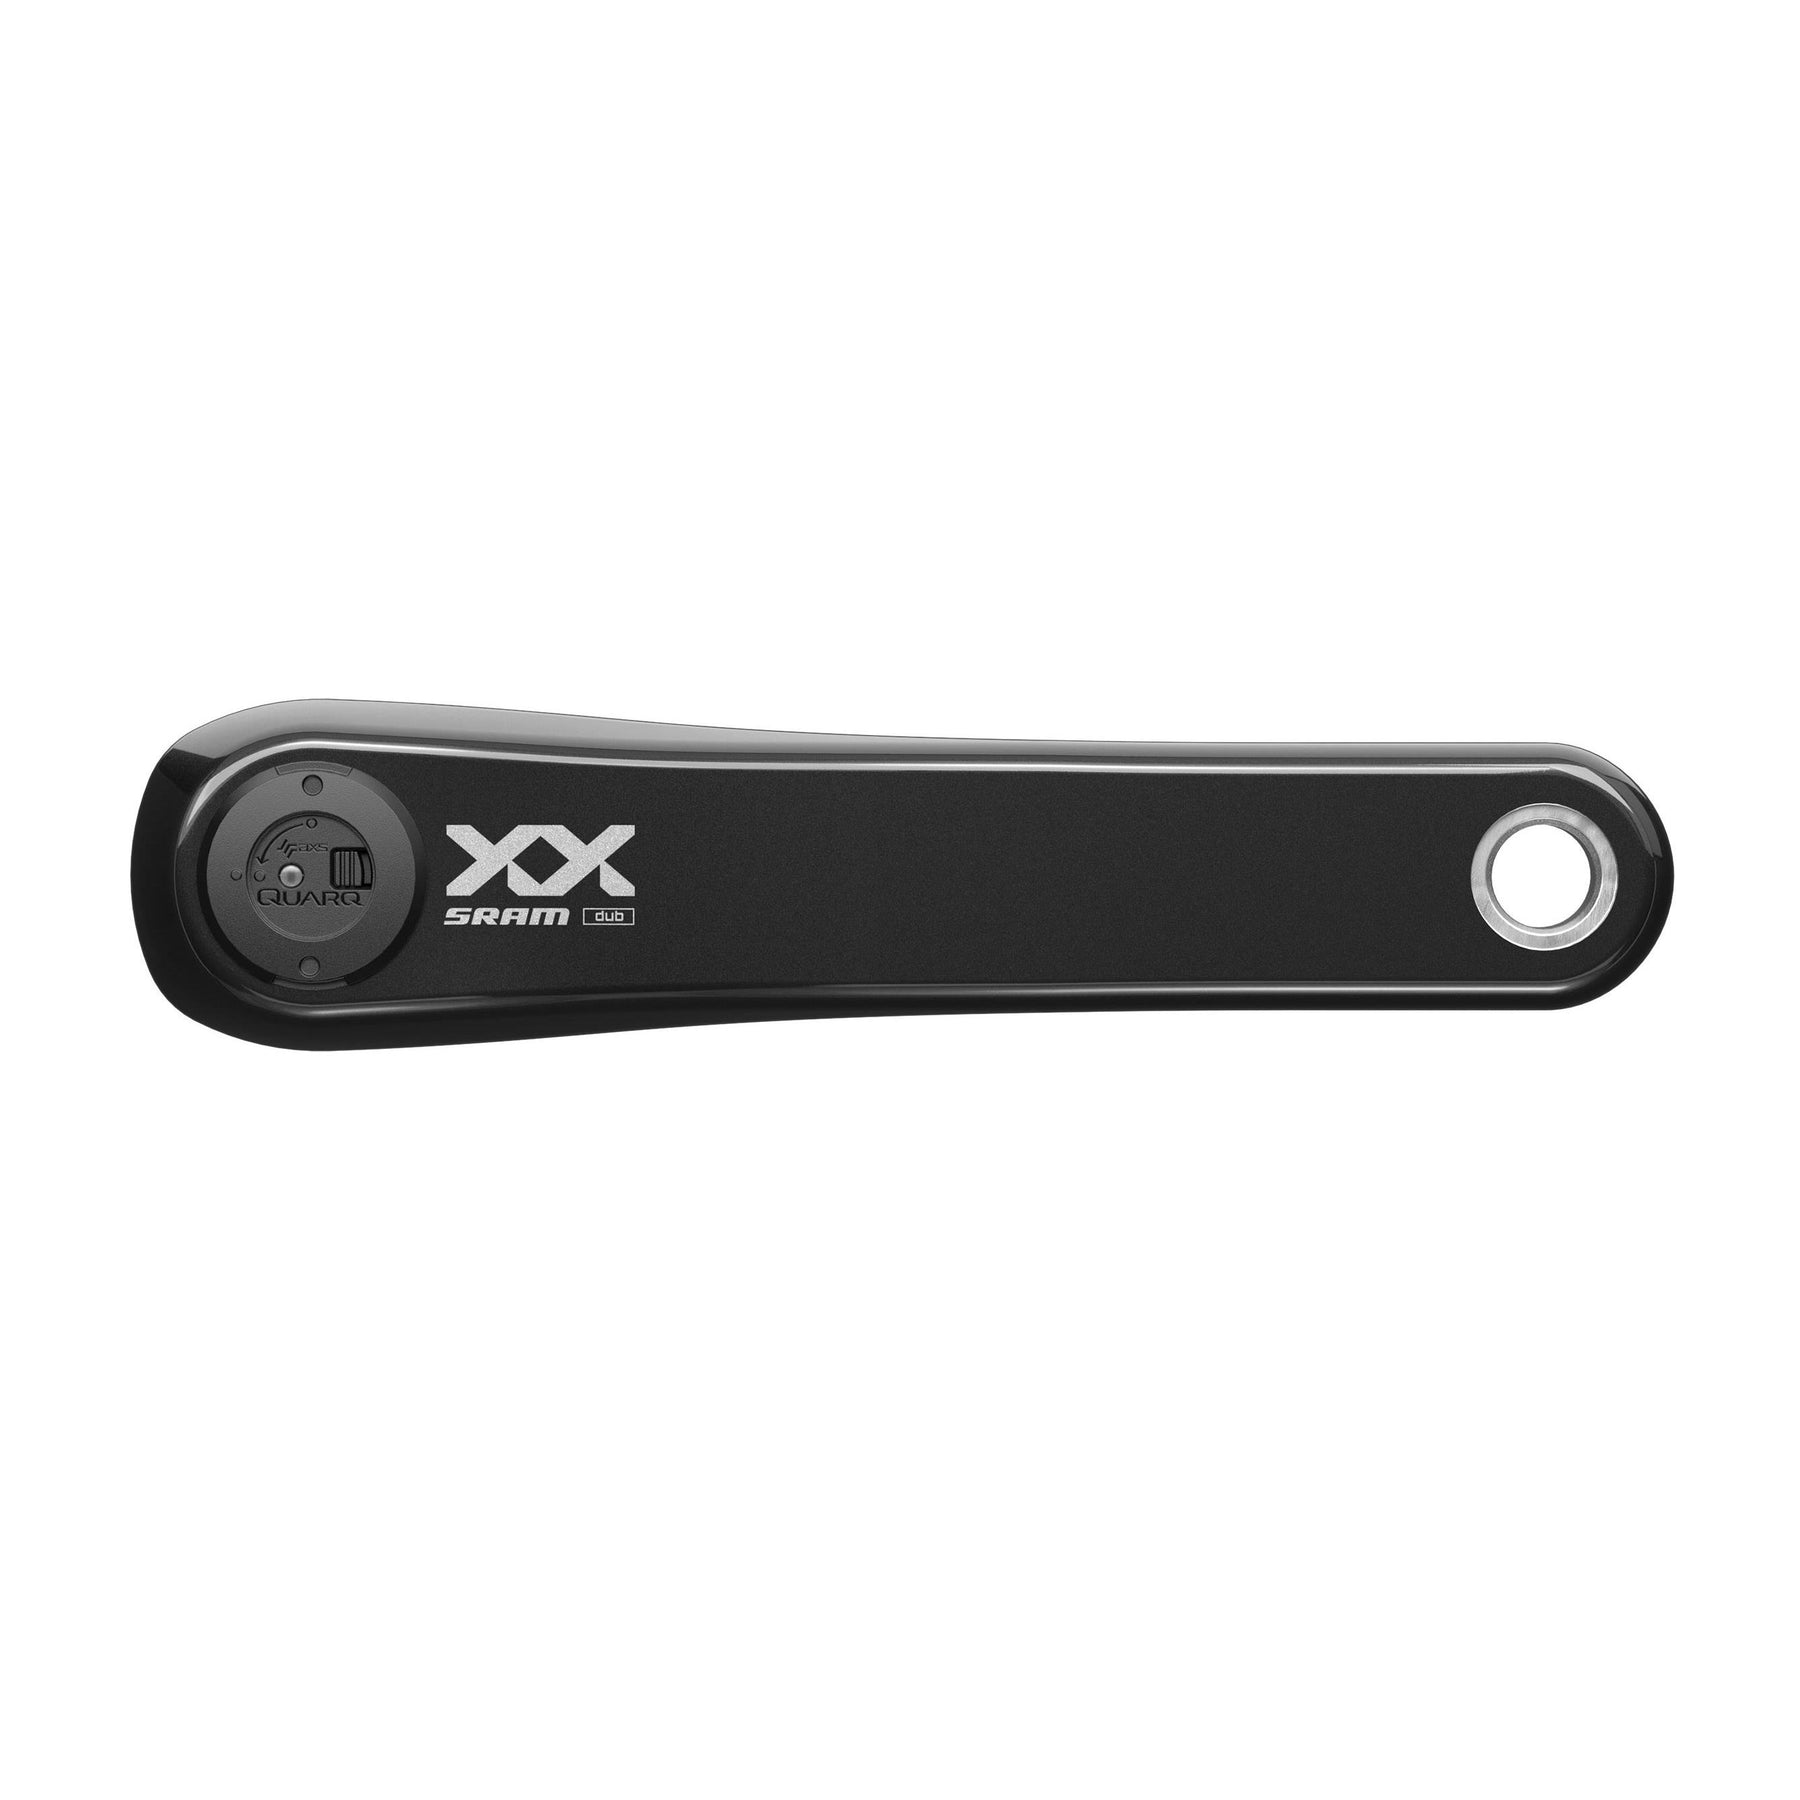 SRAM XX Eagle Q174 55mm Chainline Dub Mtb Wide Power Meter Upgrade - Left Arm And Powermeter Spindle 